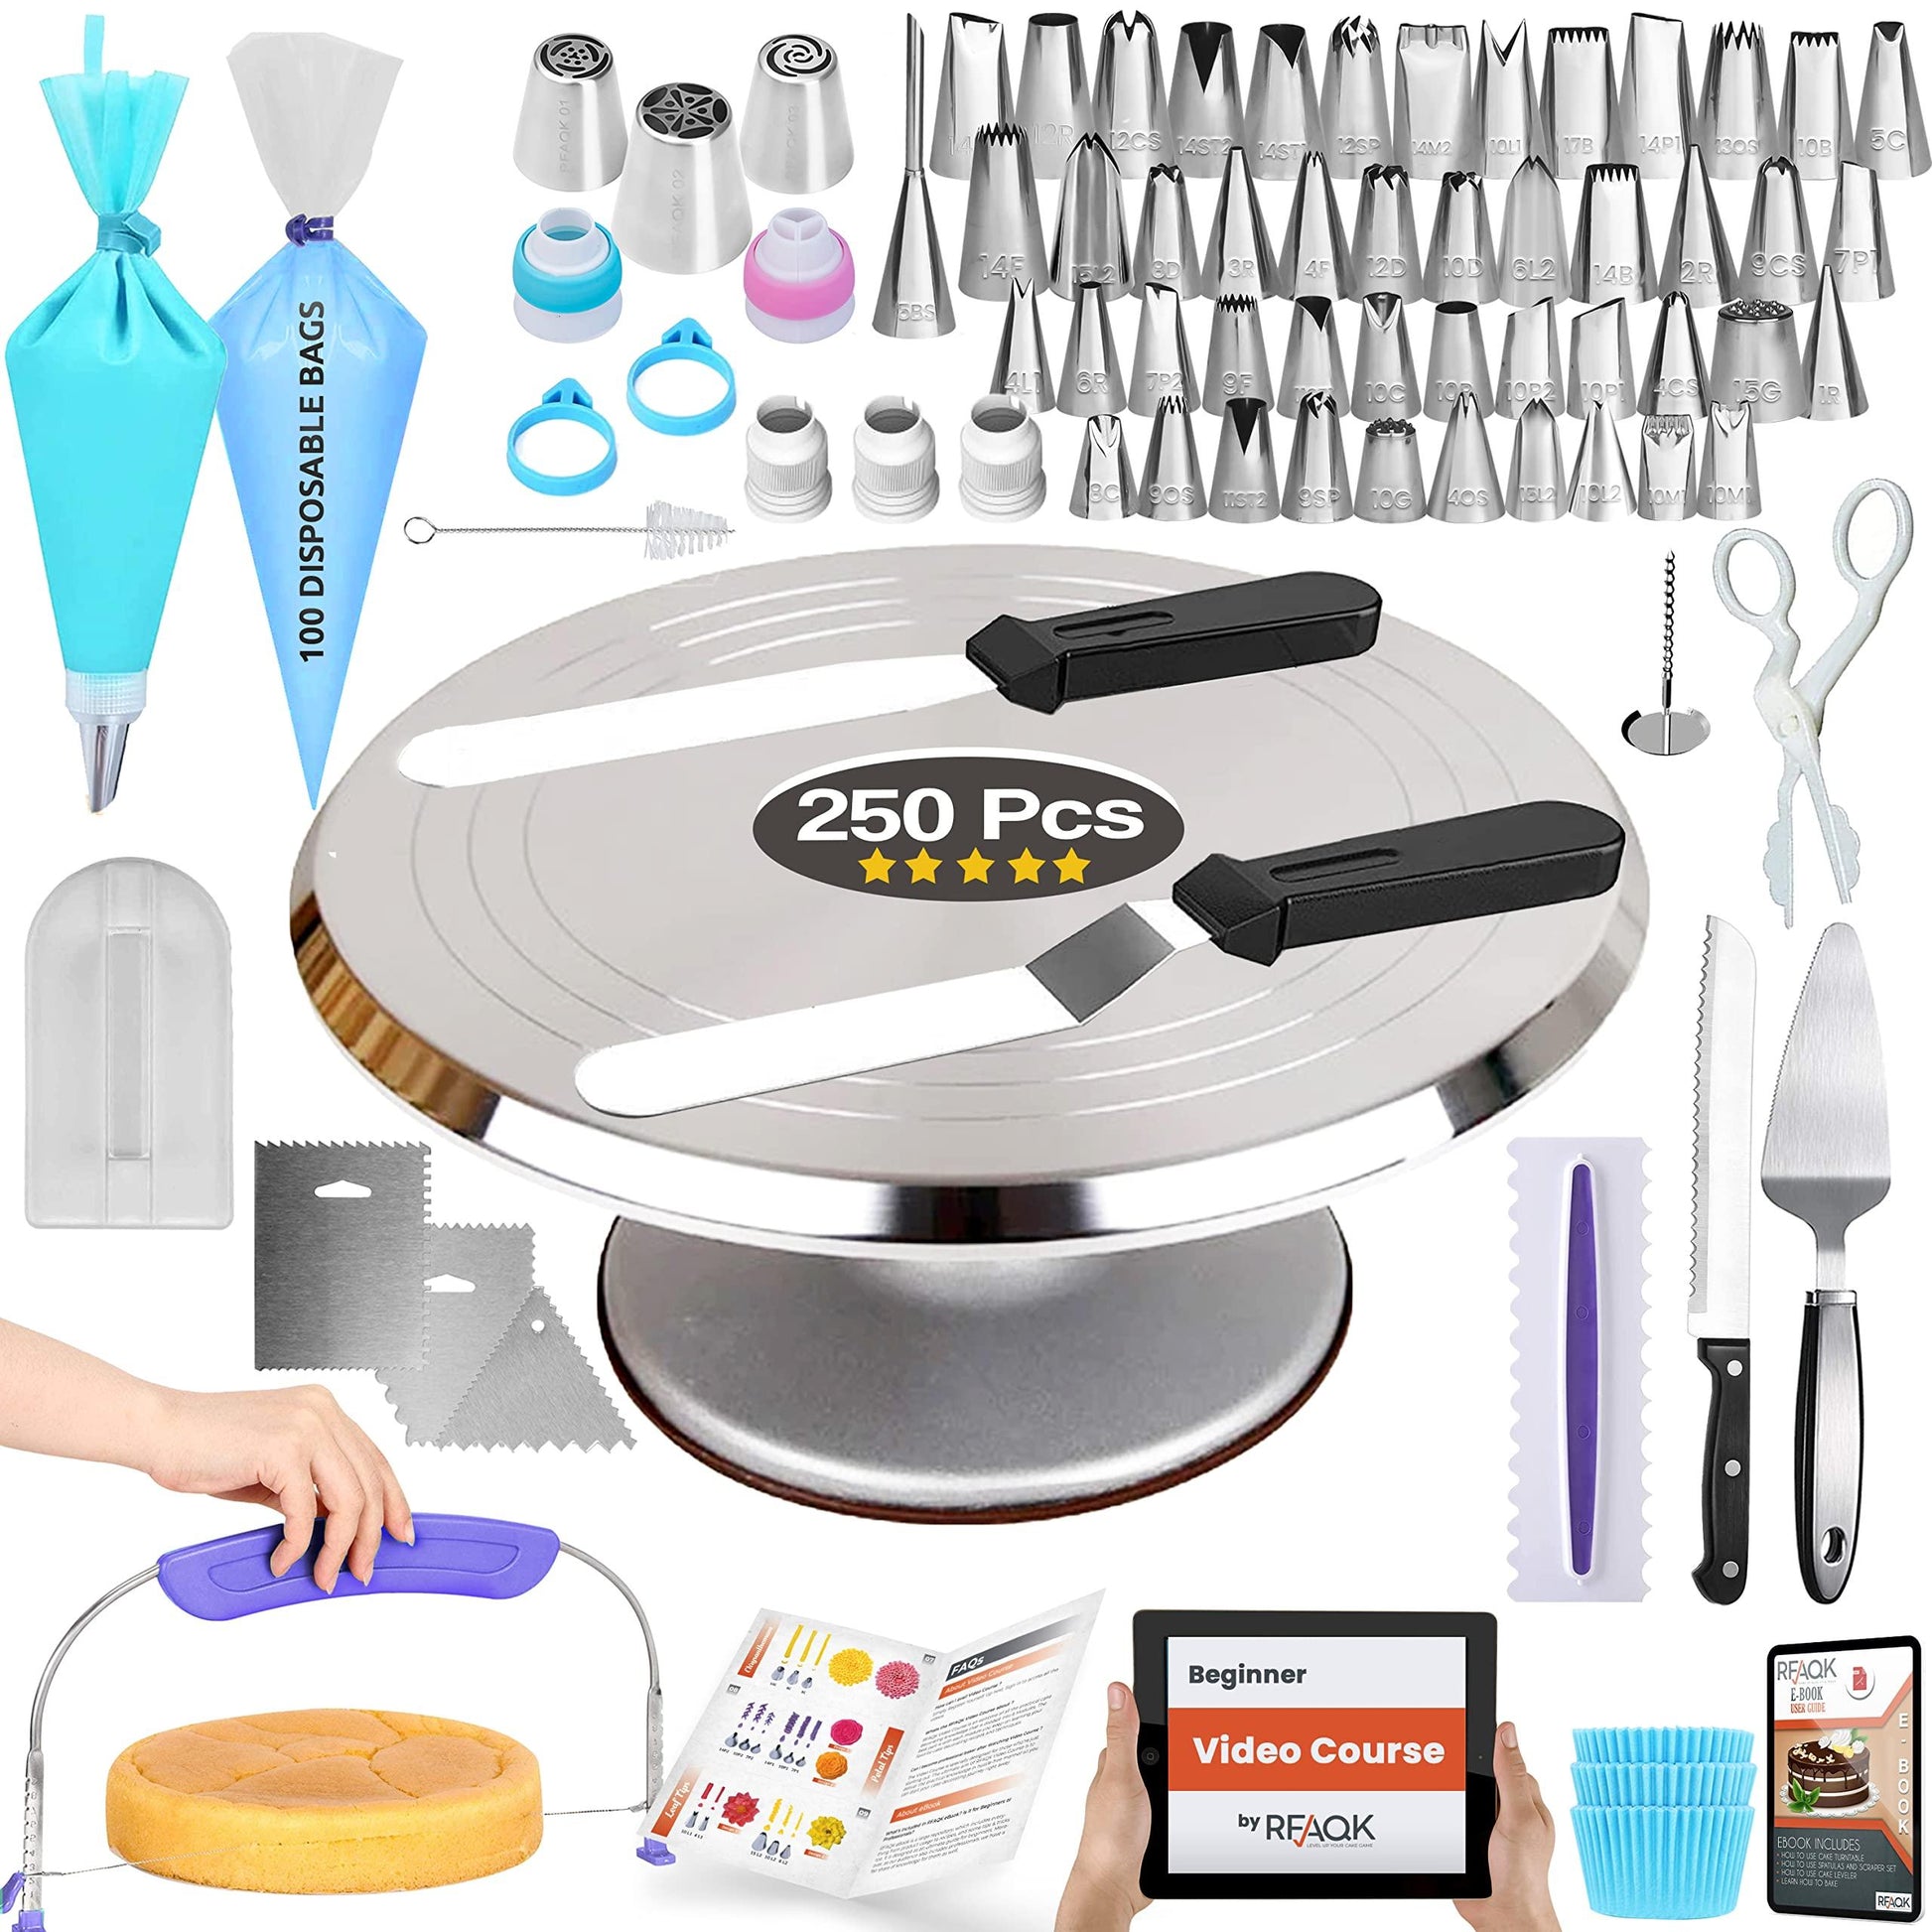 RFAQK 250 PCs Aluminum Cake Decorating Tools Kit with 12" Metal Turntable & Knife set-48 Numbered Icing Tips-3 Russian Piping Nozzles-Straight & Angled Spatula-Cake Leveler& Baking Supplies Tools - CookCave